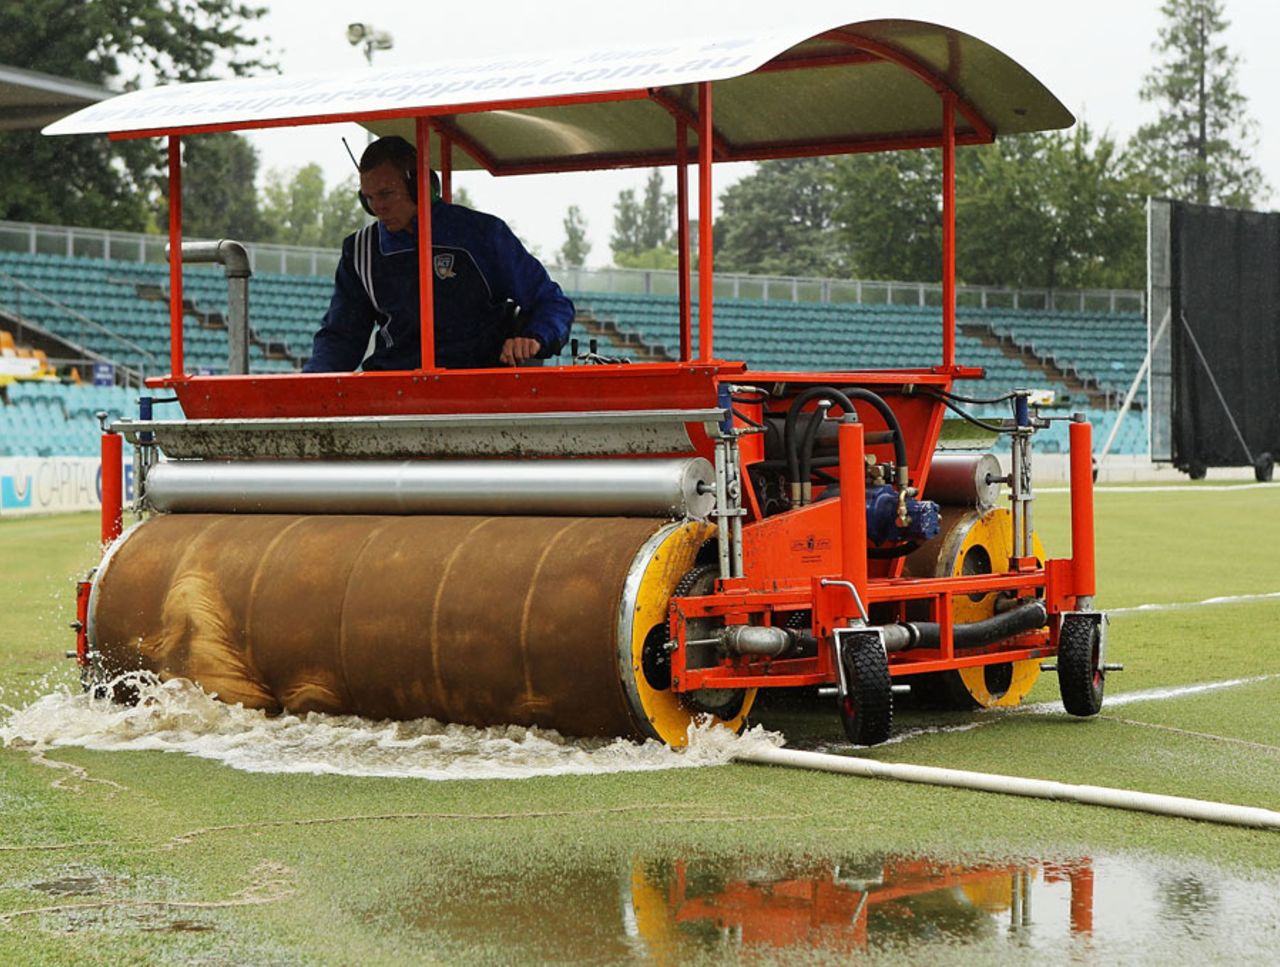 A super-sopper being used to dry the outfield, Prime Minister's XI v Sri Lankans, warm-up game, Canberra, February 3, 2012